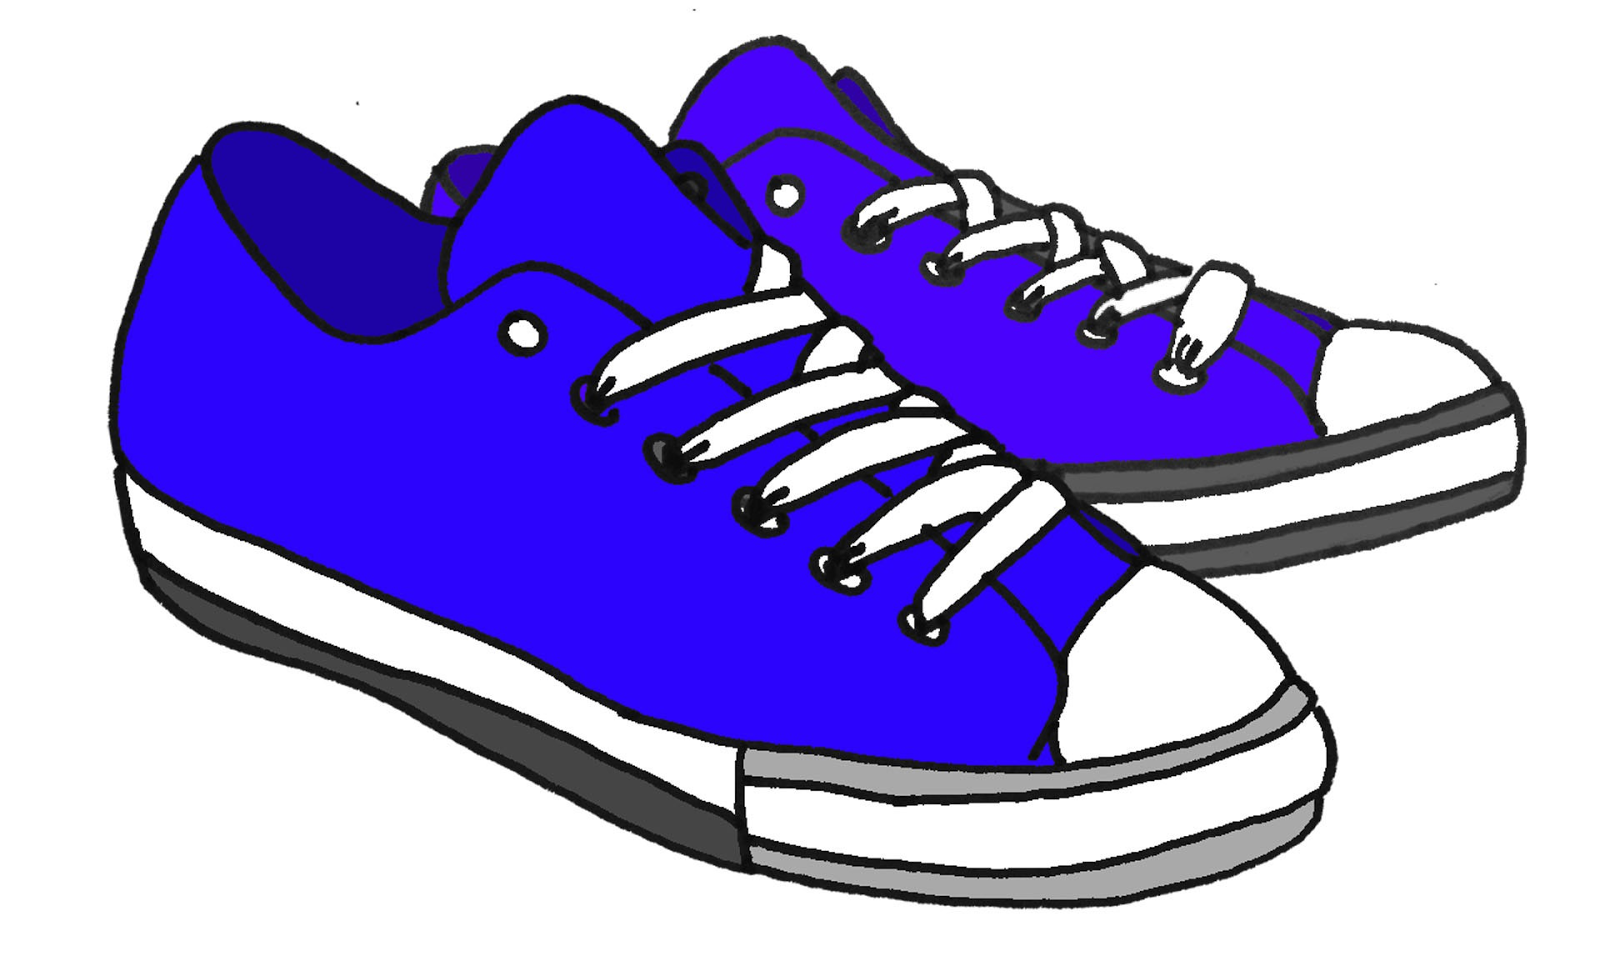 new shoes clipart - photo #13